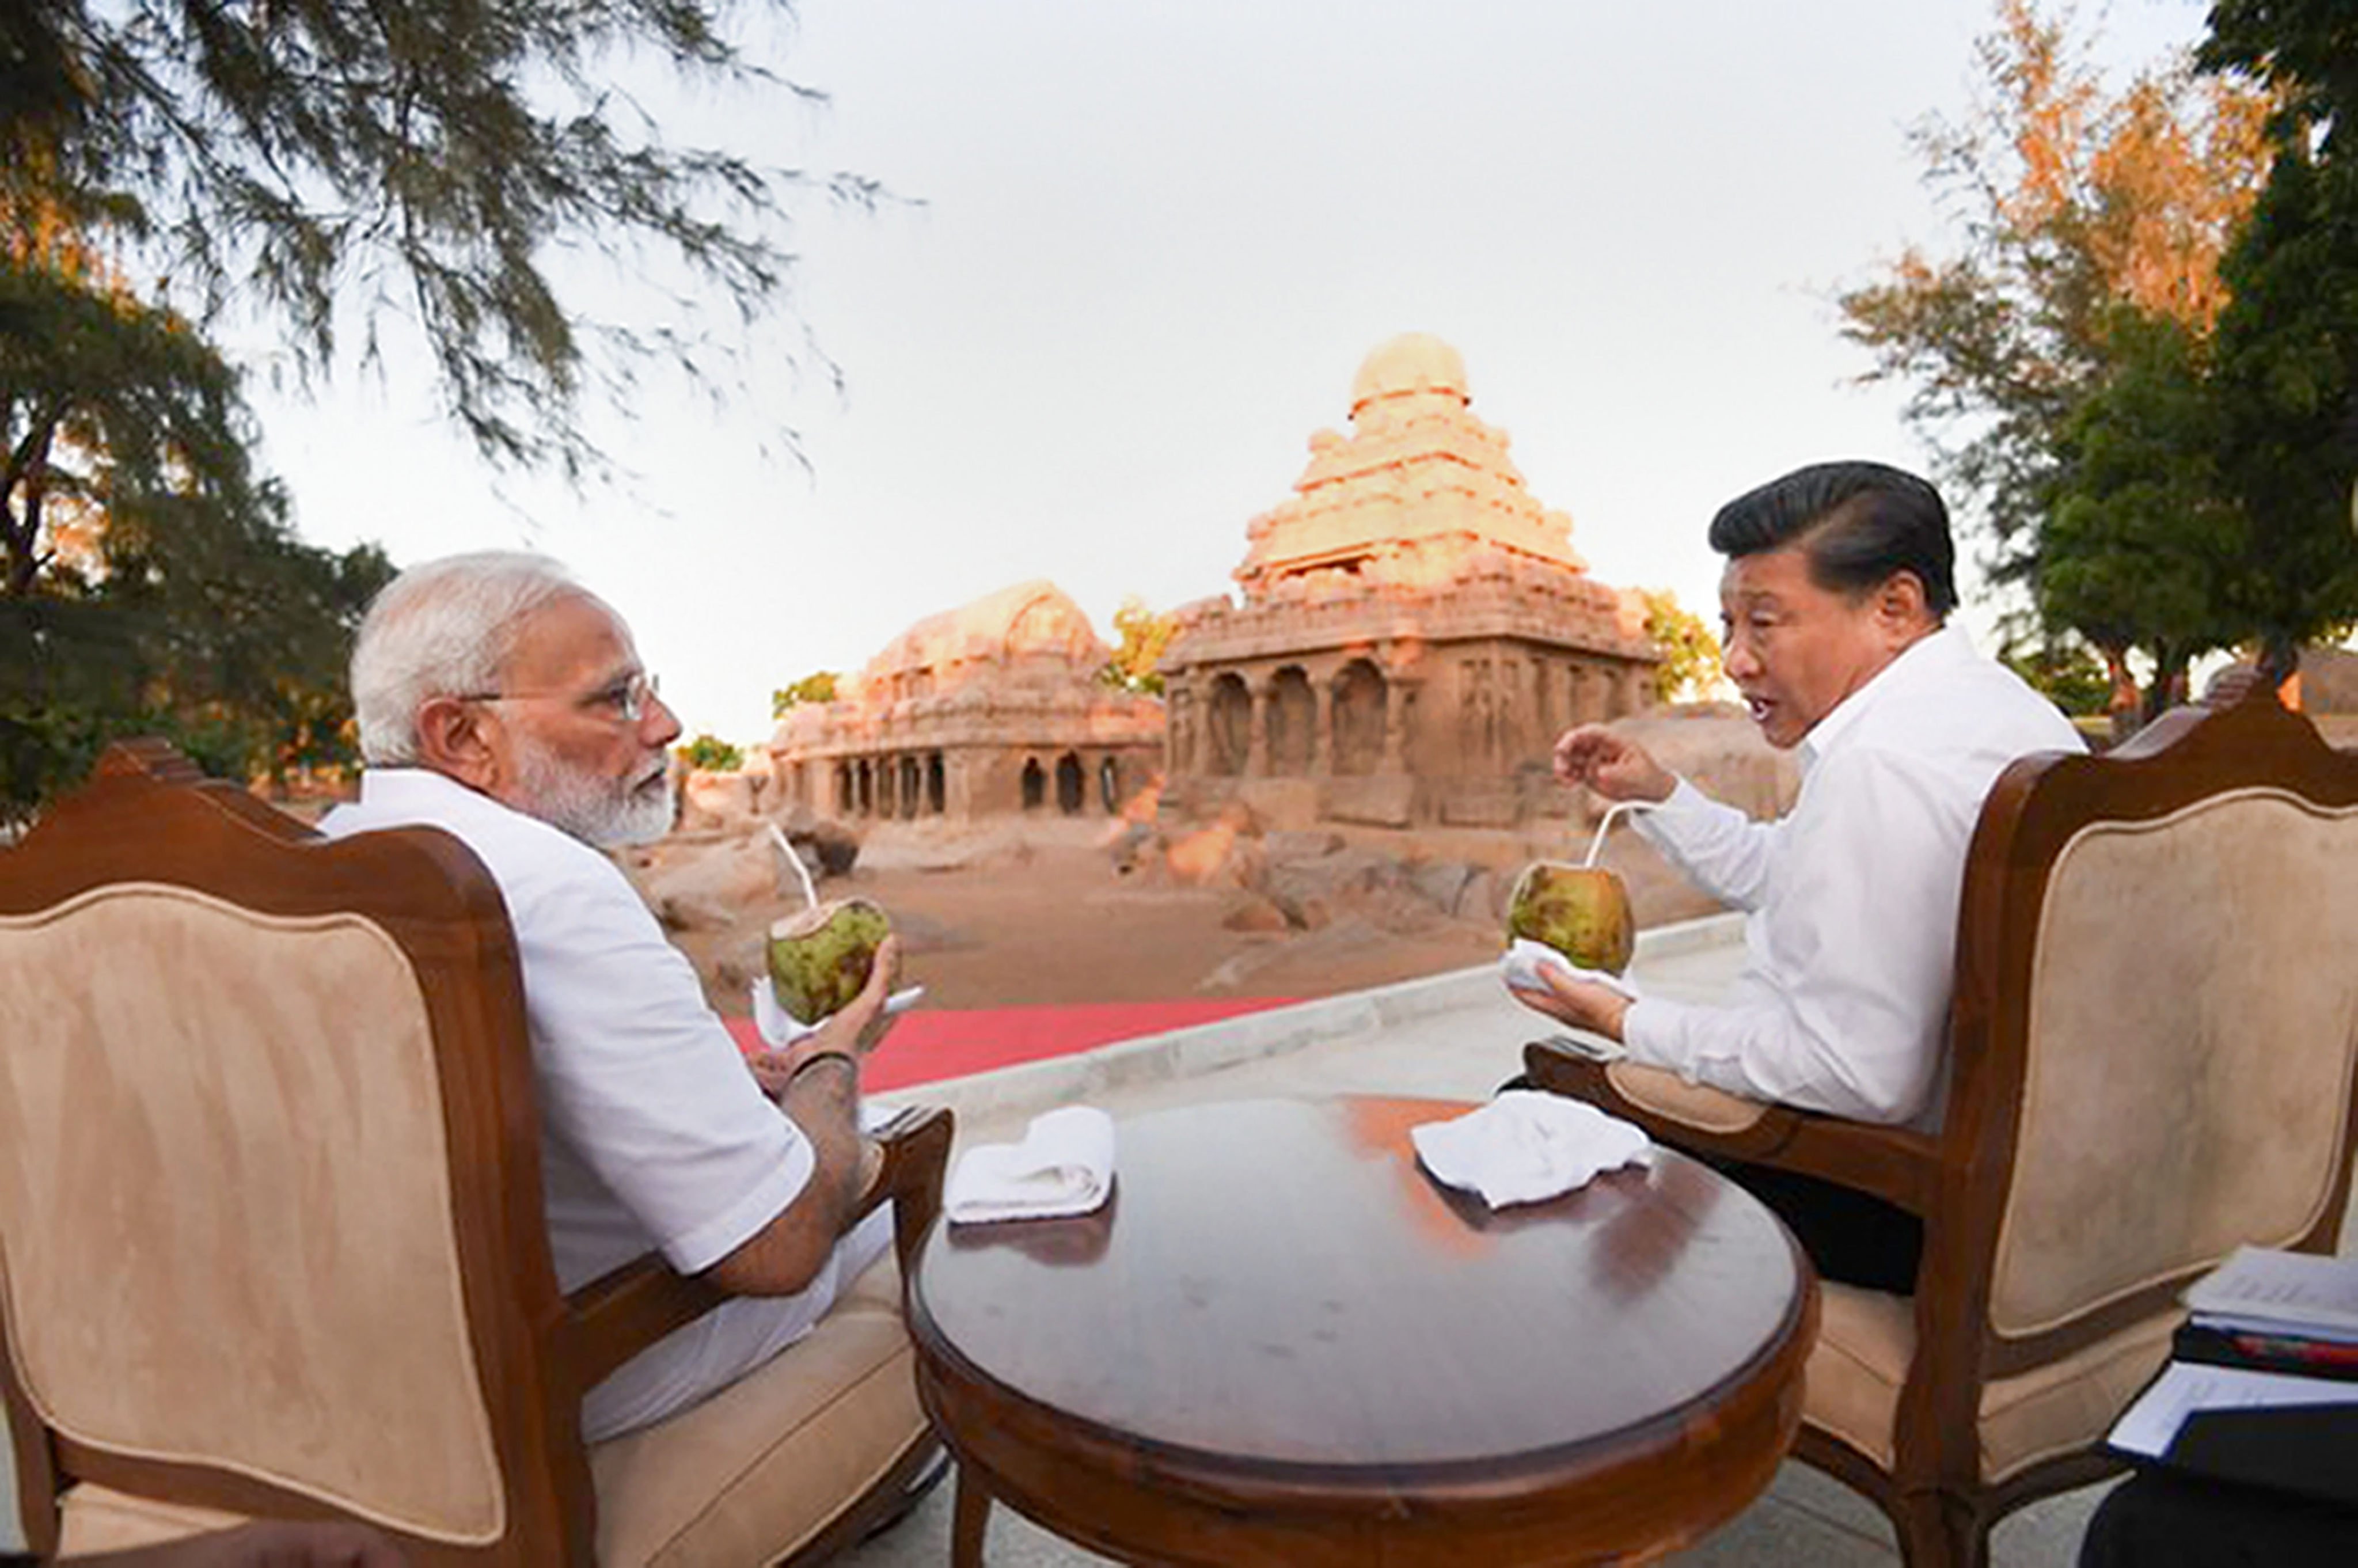 Indian Prime Minister Narendra Modi and Chinese President Xi Jinping chat during their informal summit in Mamallapuram, India, on October 11, 2019. Photo: PTI/dpa